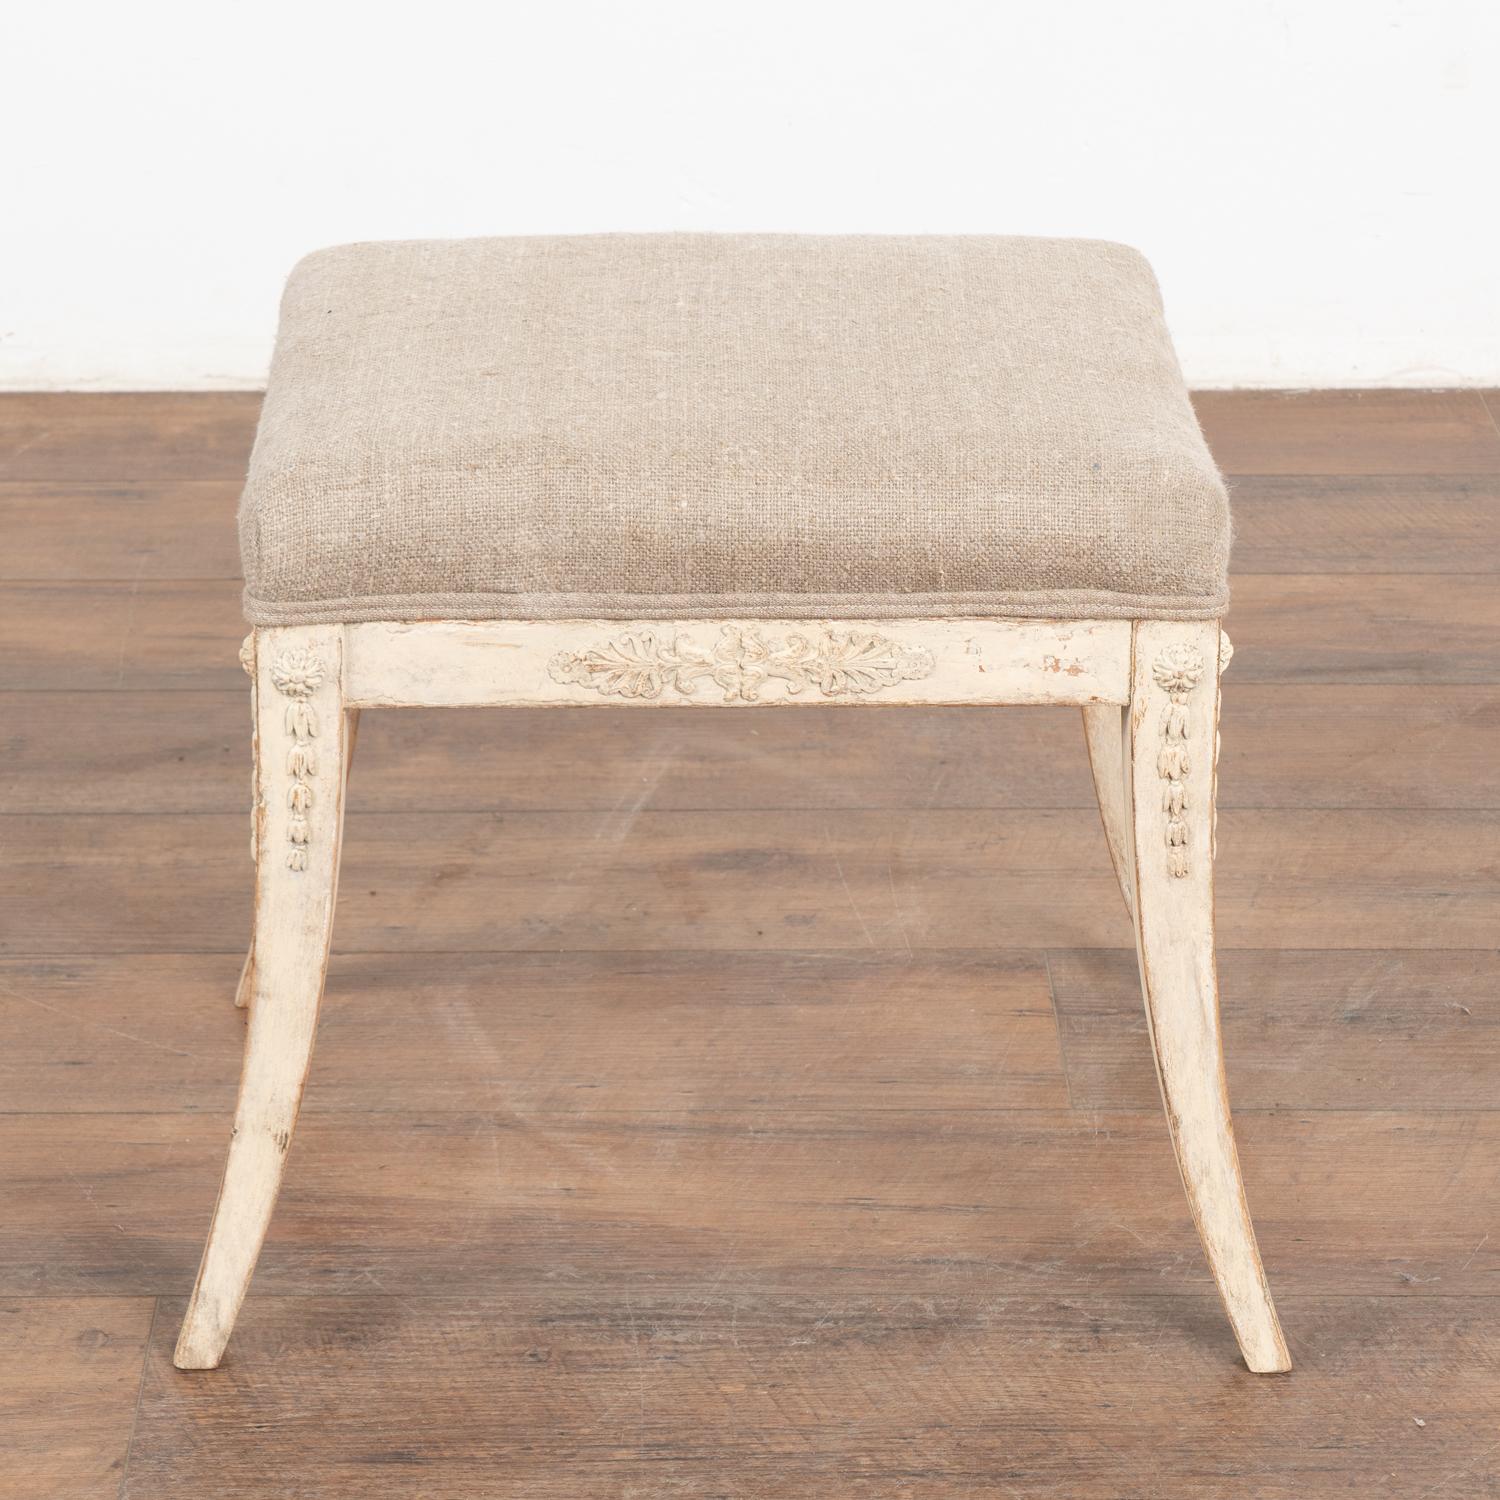 White Swedish Gustavian Stool With Saber Legs, circa 1840 In Good Condition For Sale In Round Top, TX